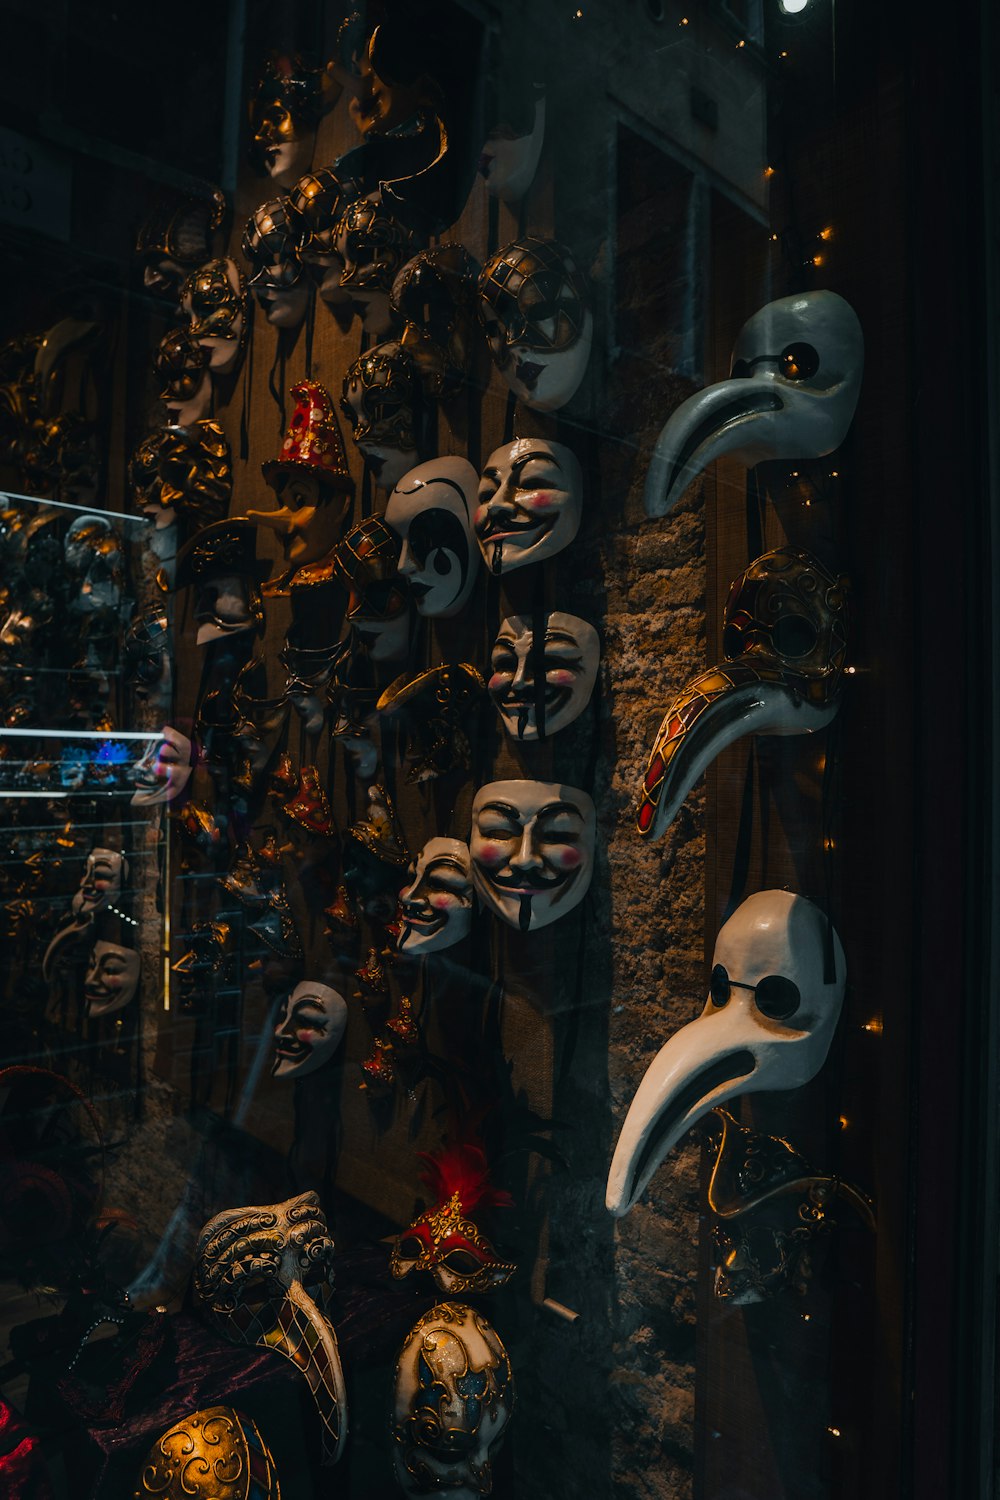 a display of masks in a store window